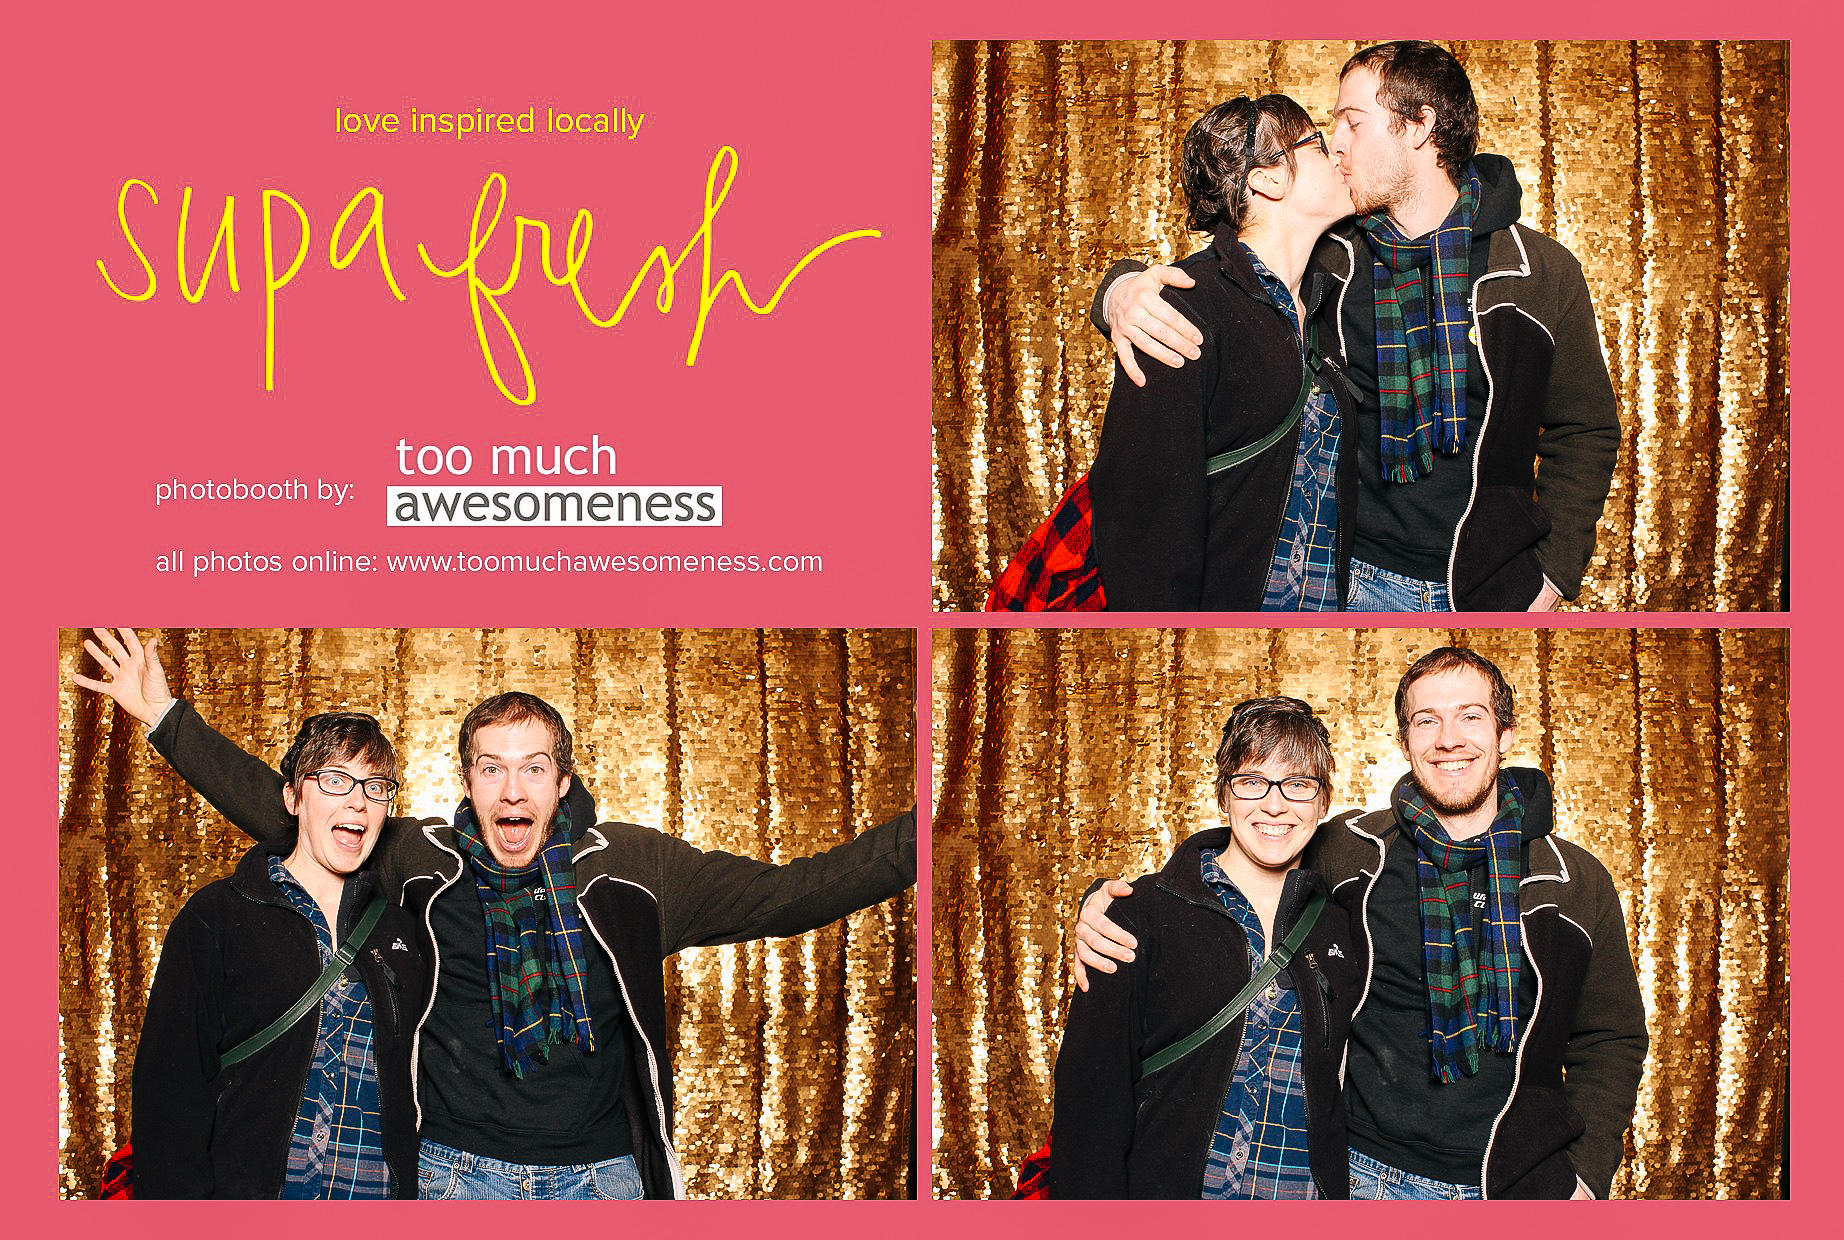 00024-Open Air Photobooth in Cleveland - Too Much Awesomeness.jpg